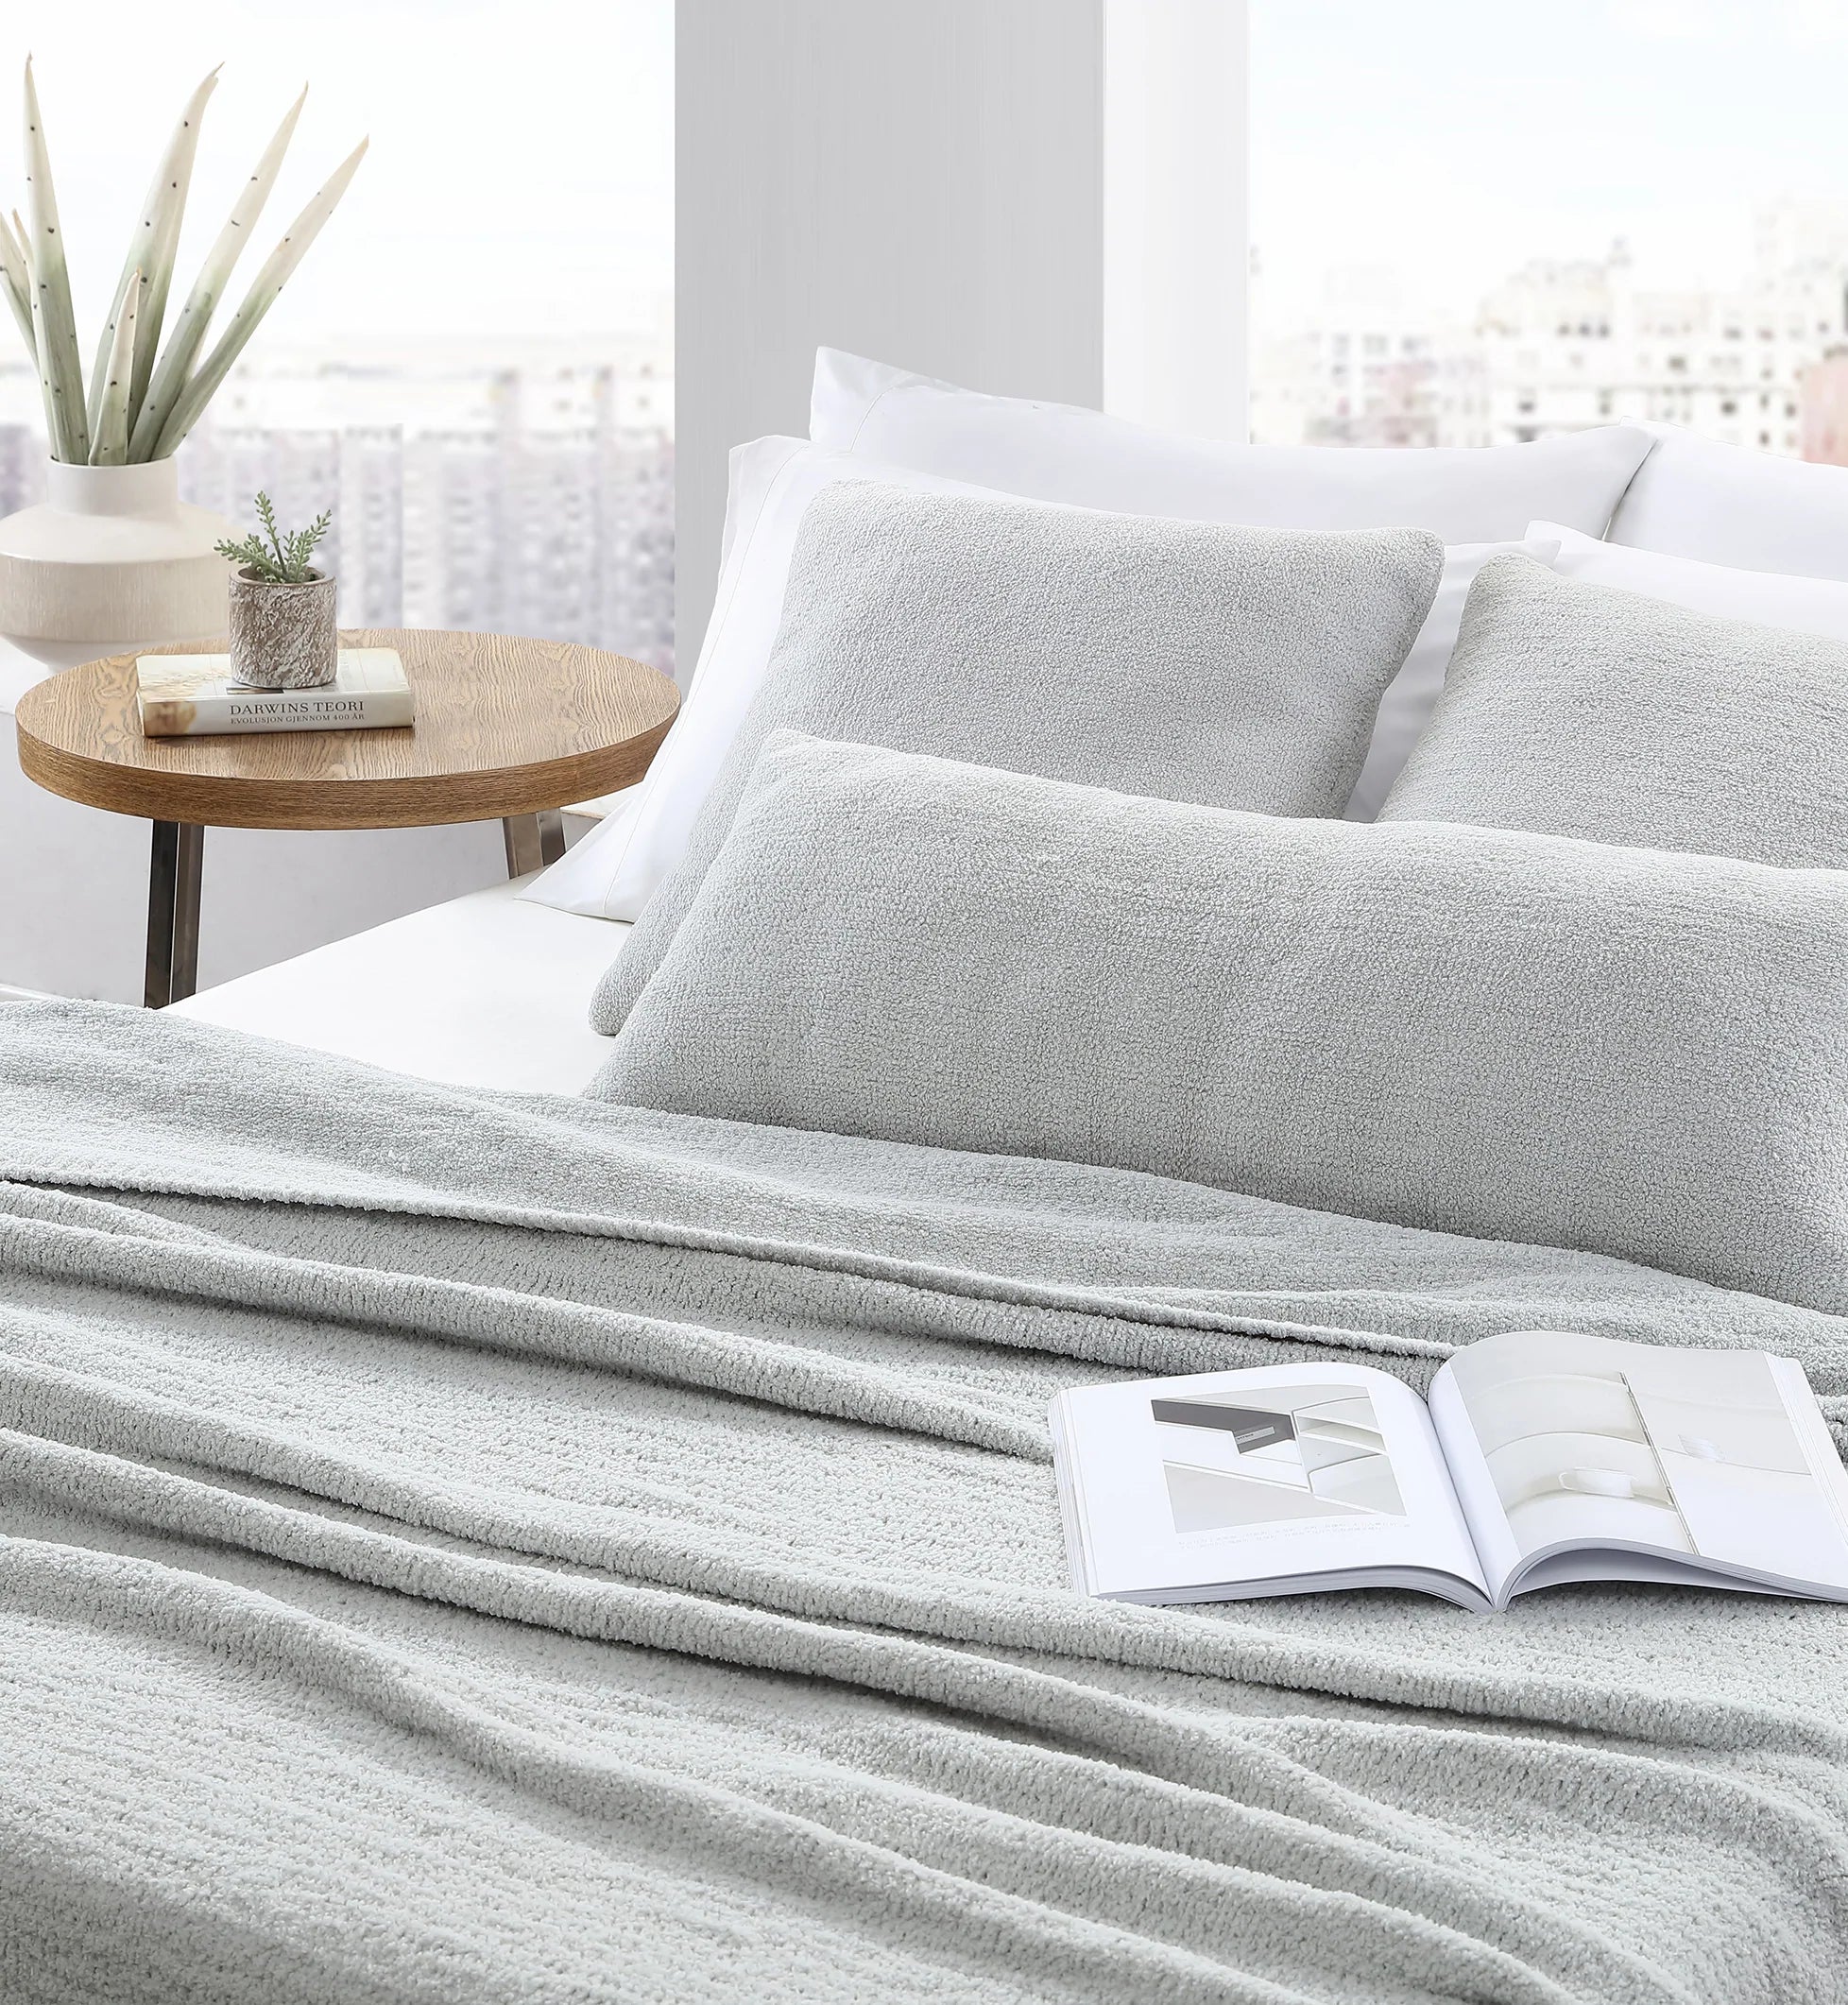 Here's Everything You Need To Know About Replacing Your Bedding